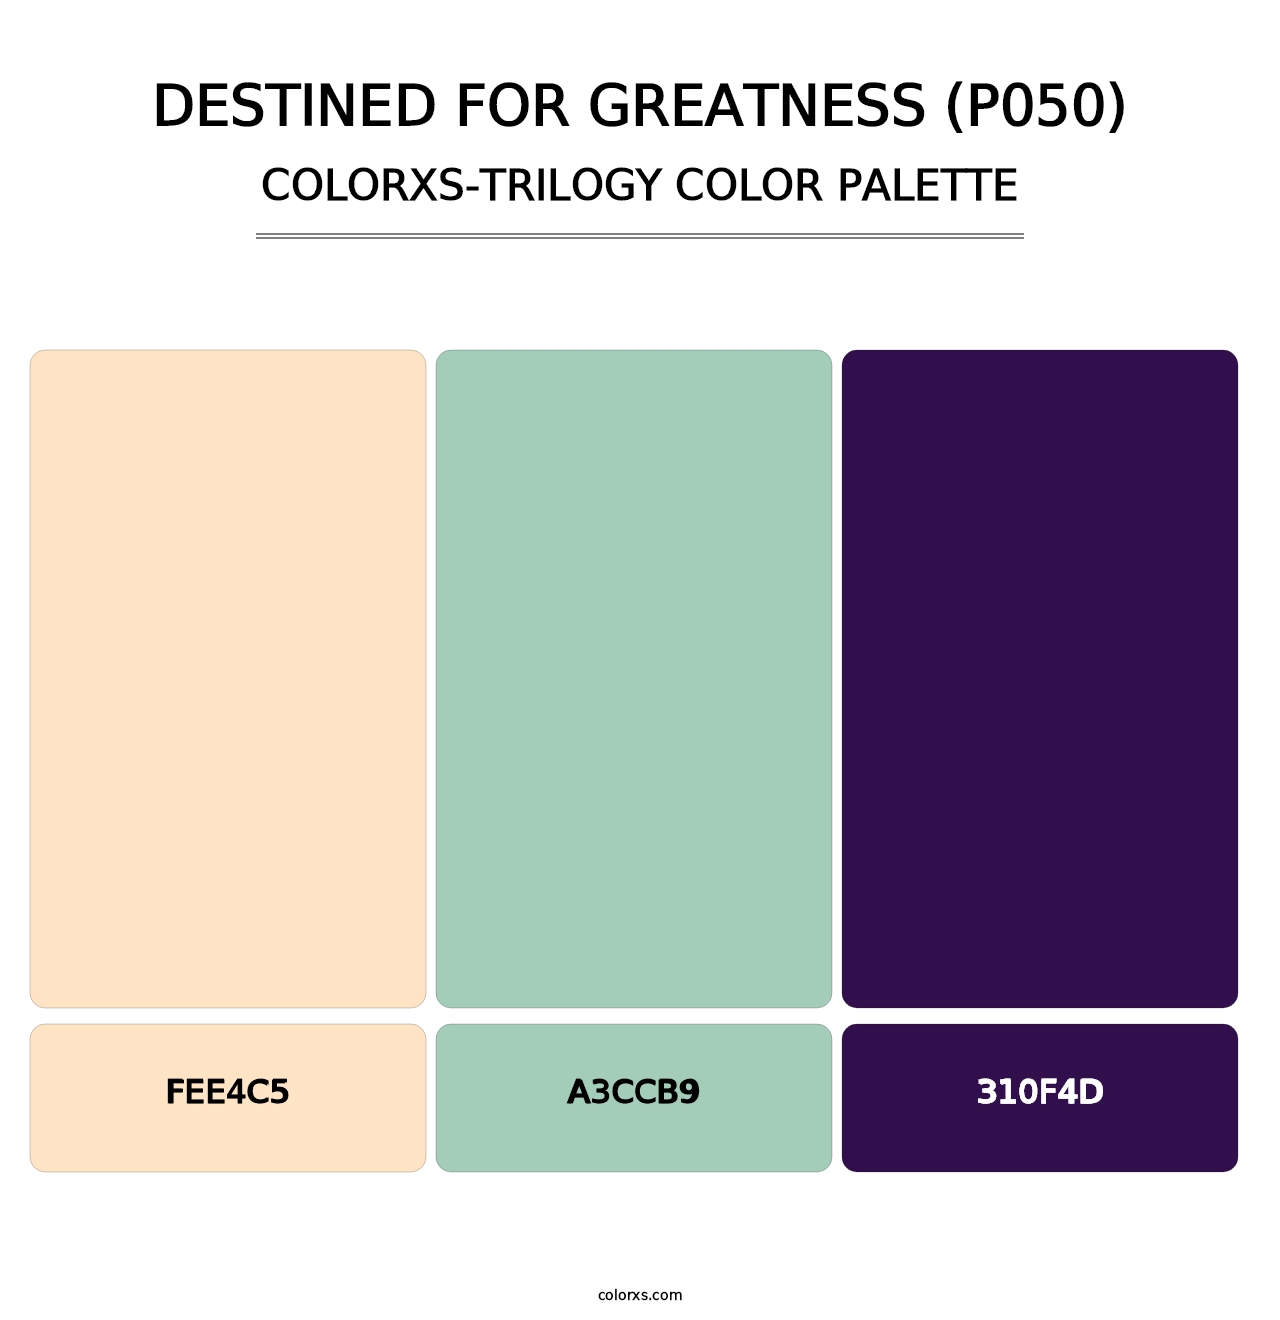 Destined for Greatness (P050) - Colorxs Trilogy Palette